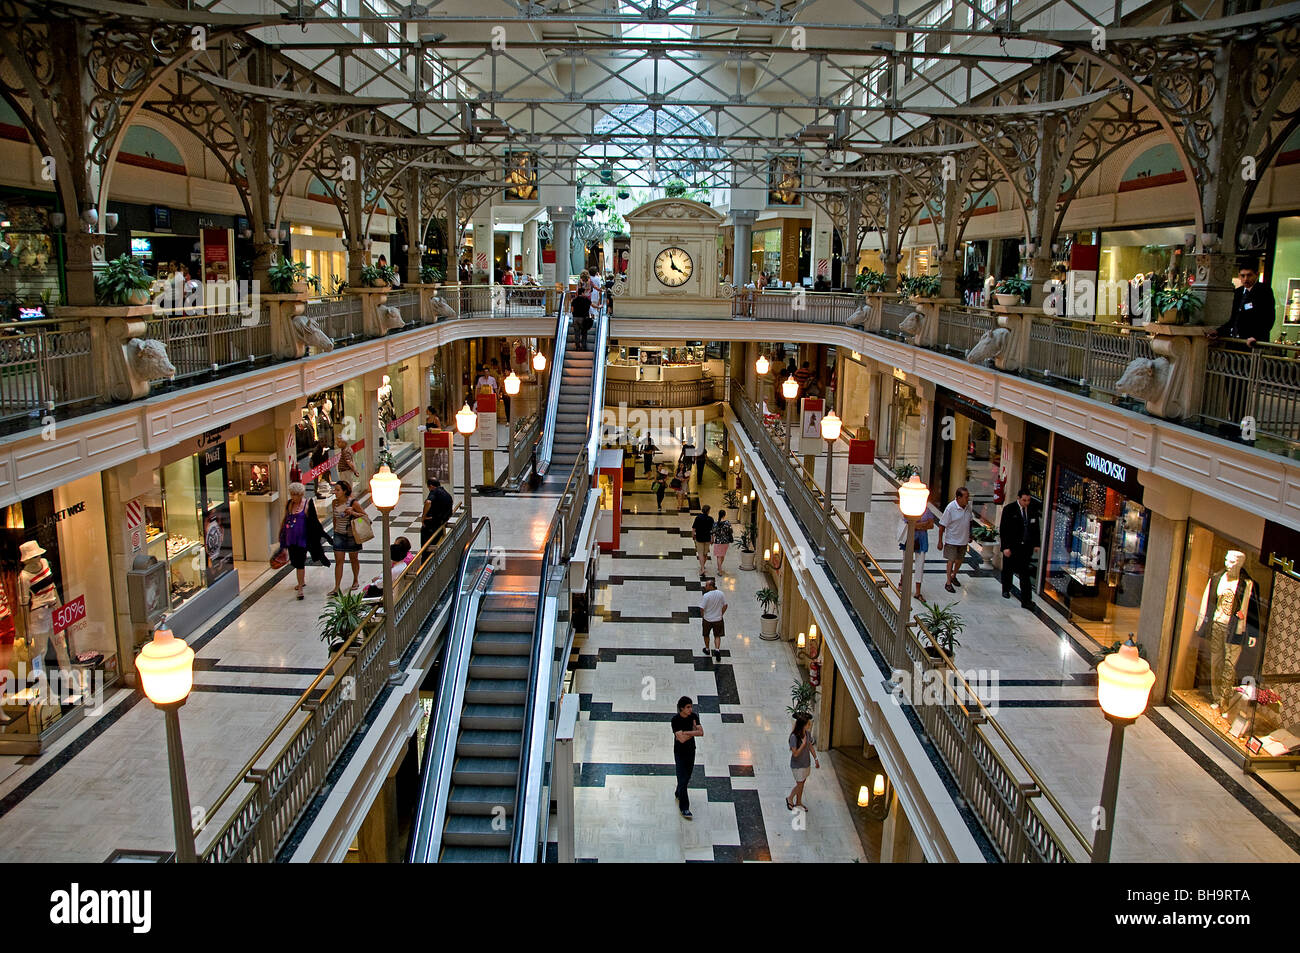 Buenos Aires Argentina Patio Bullrich Shopping Mall Foto Stock